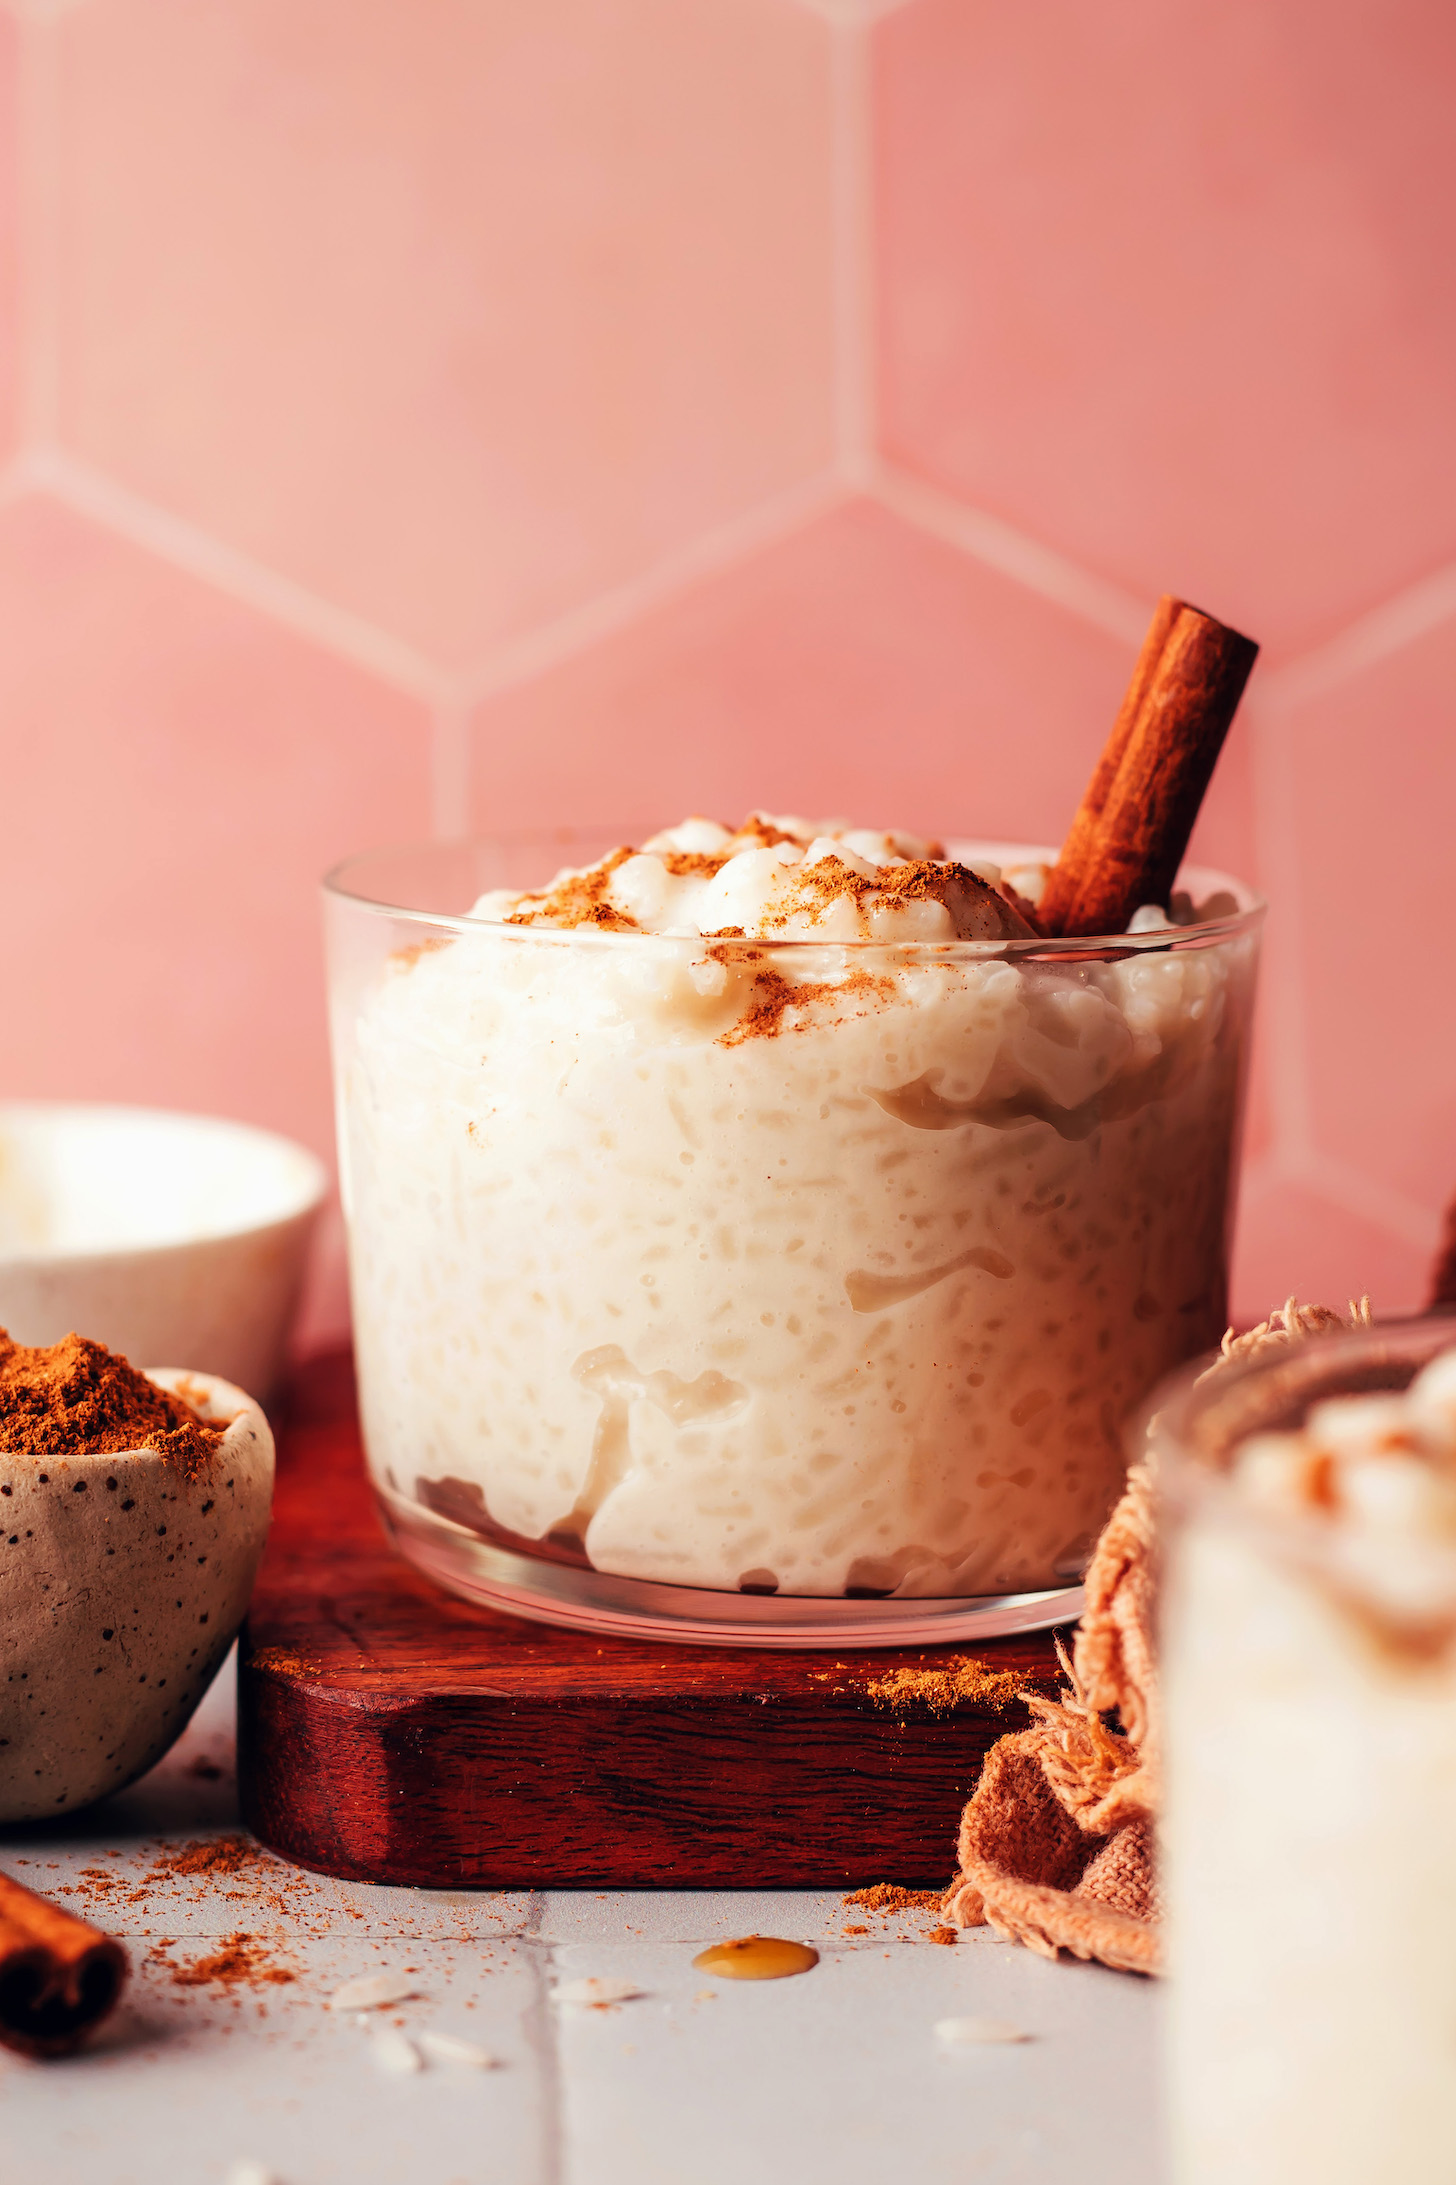 Small dessert glass filled with vegan rice pudding and garnished with ground cinnamon and a cinnamon stick